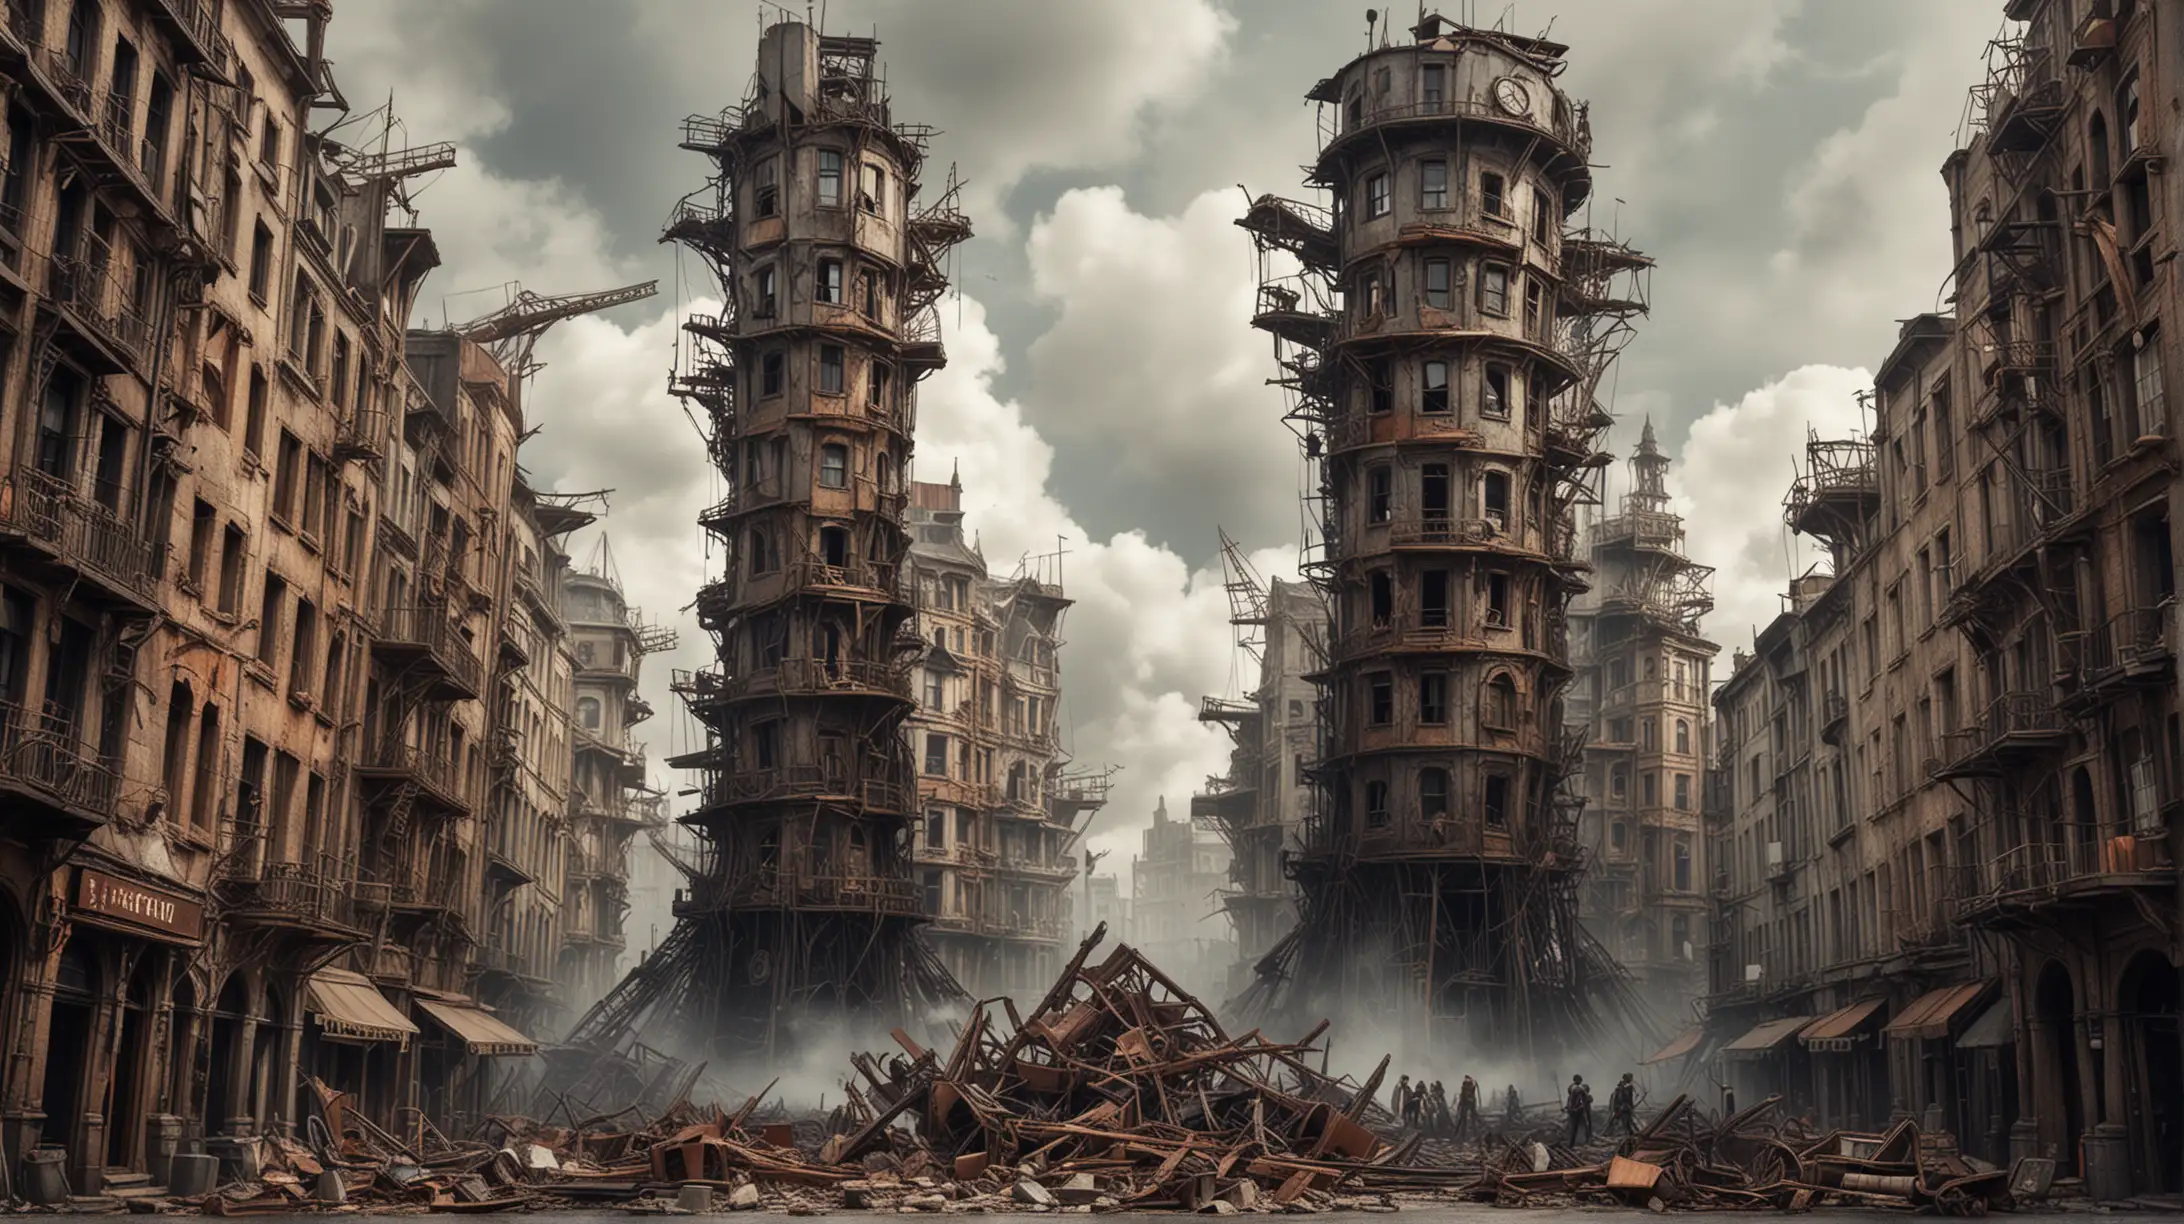 building disaster, a high tower has collapsed in the center of a steampunk city